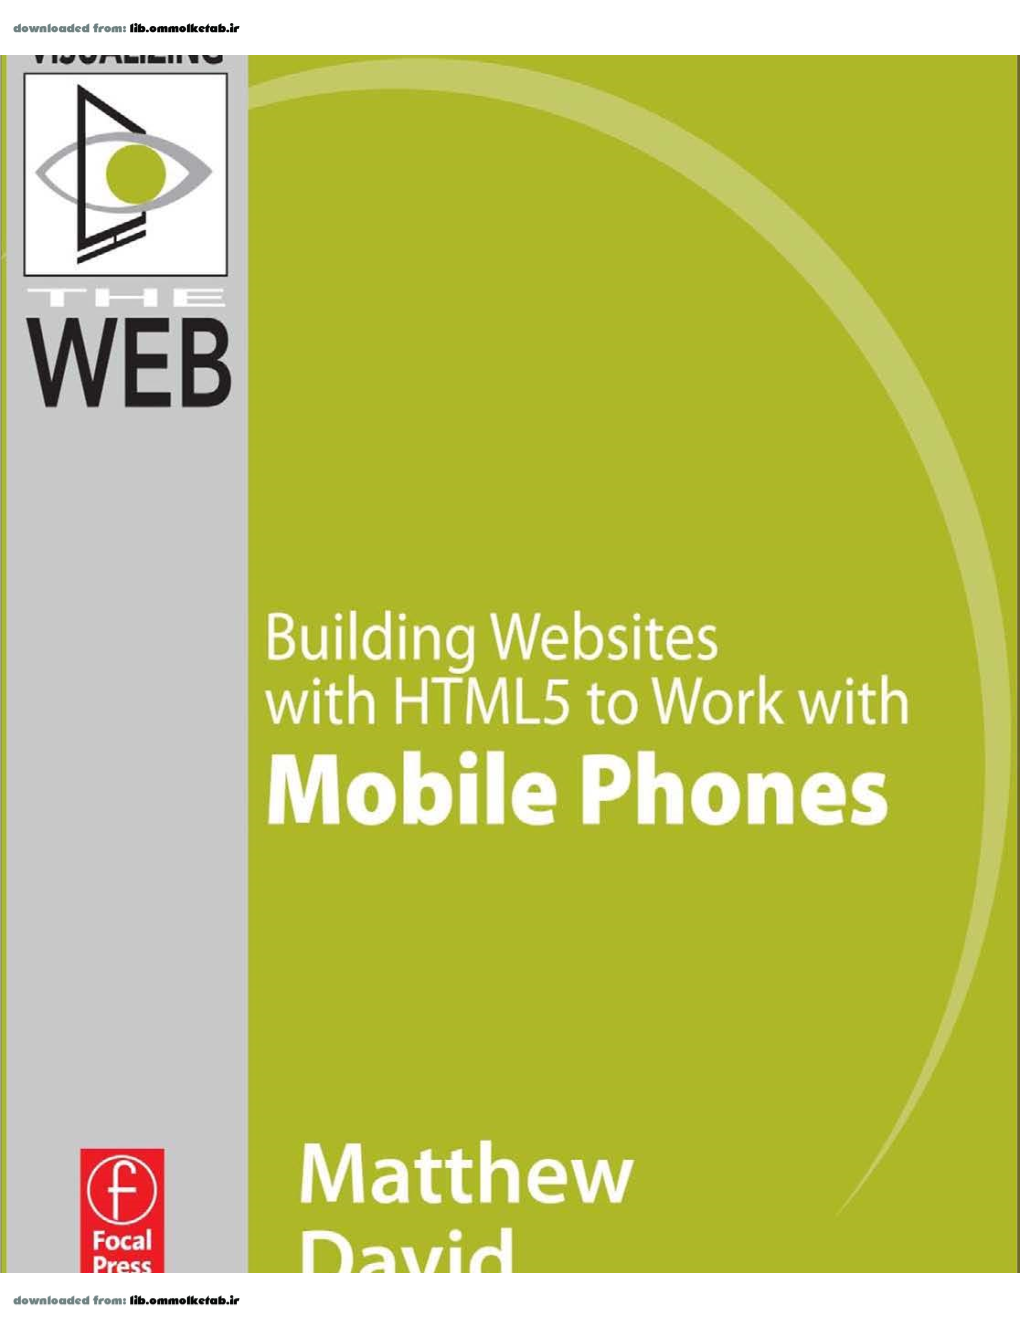 Building Websites with HTML5 to Work with Mobile Phones